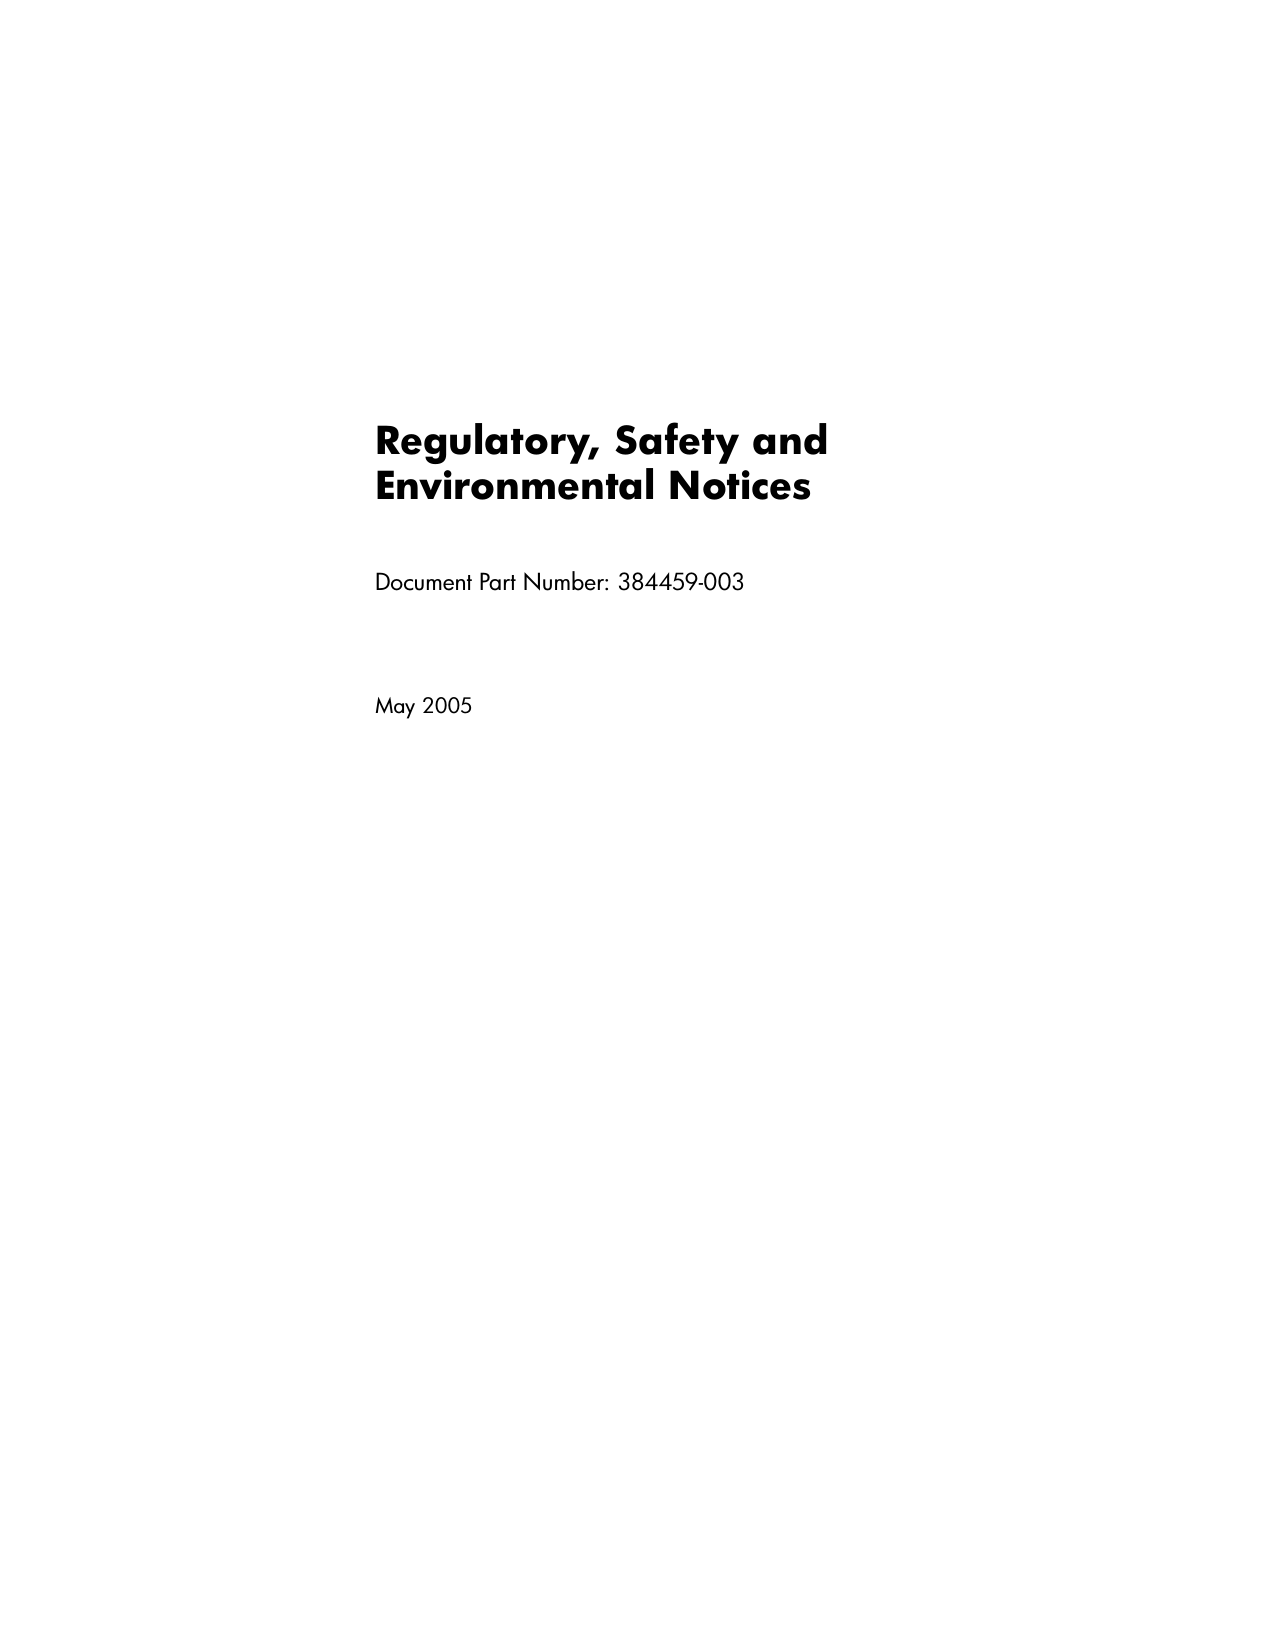 Regulatory, Safety and Environmental NoticesDocument Part Number: 384459-003May 2005